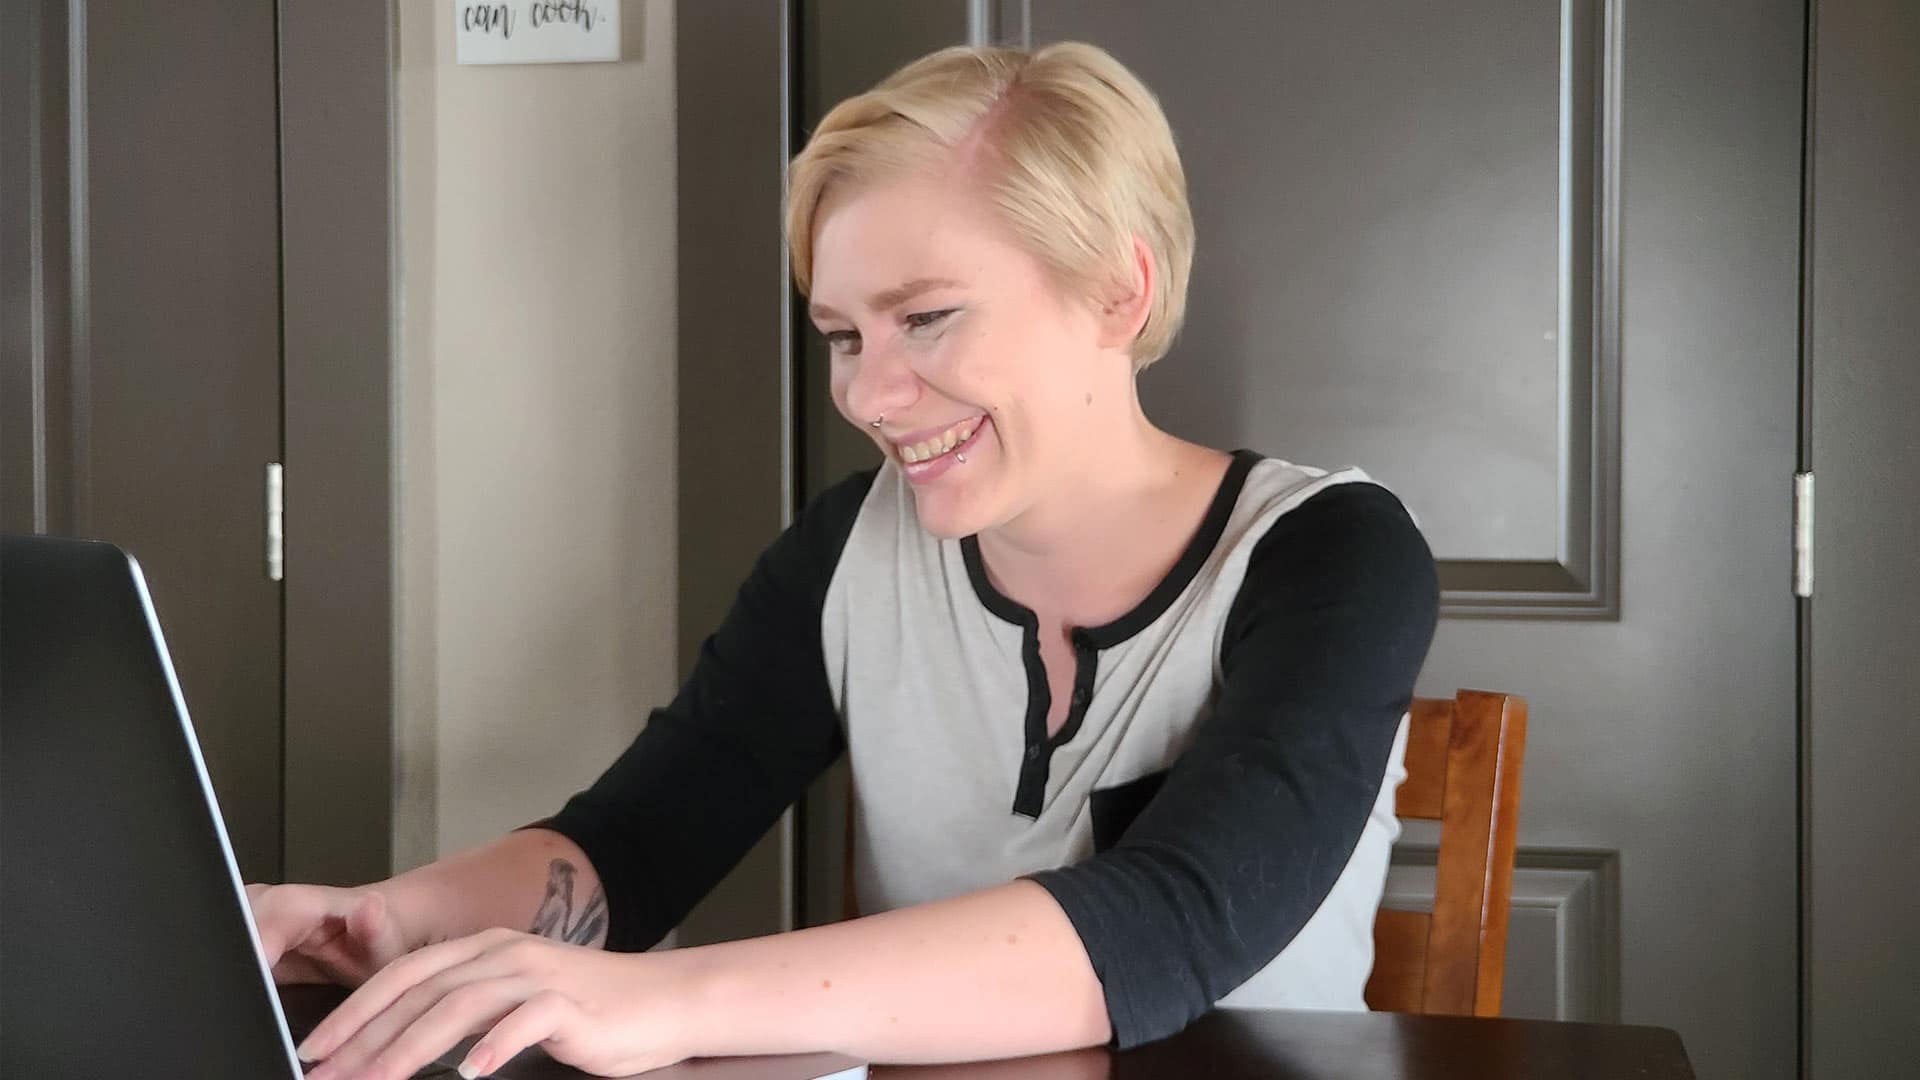 Jolene Stetz, who earned a marketing degree in 2021, wearing a grey and black long sleeve T-shirt smiling and working on her laptop.